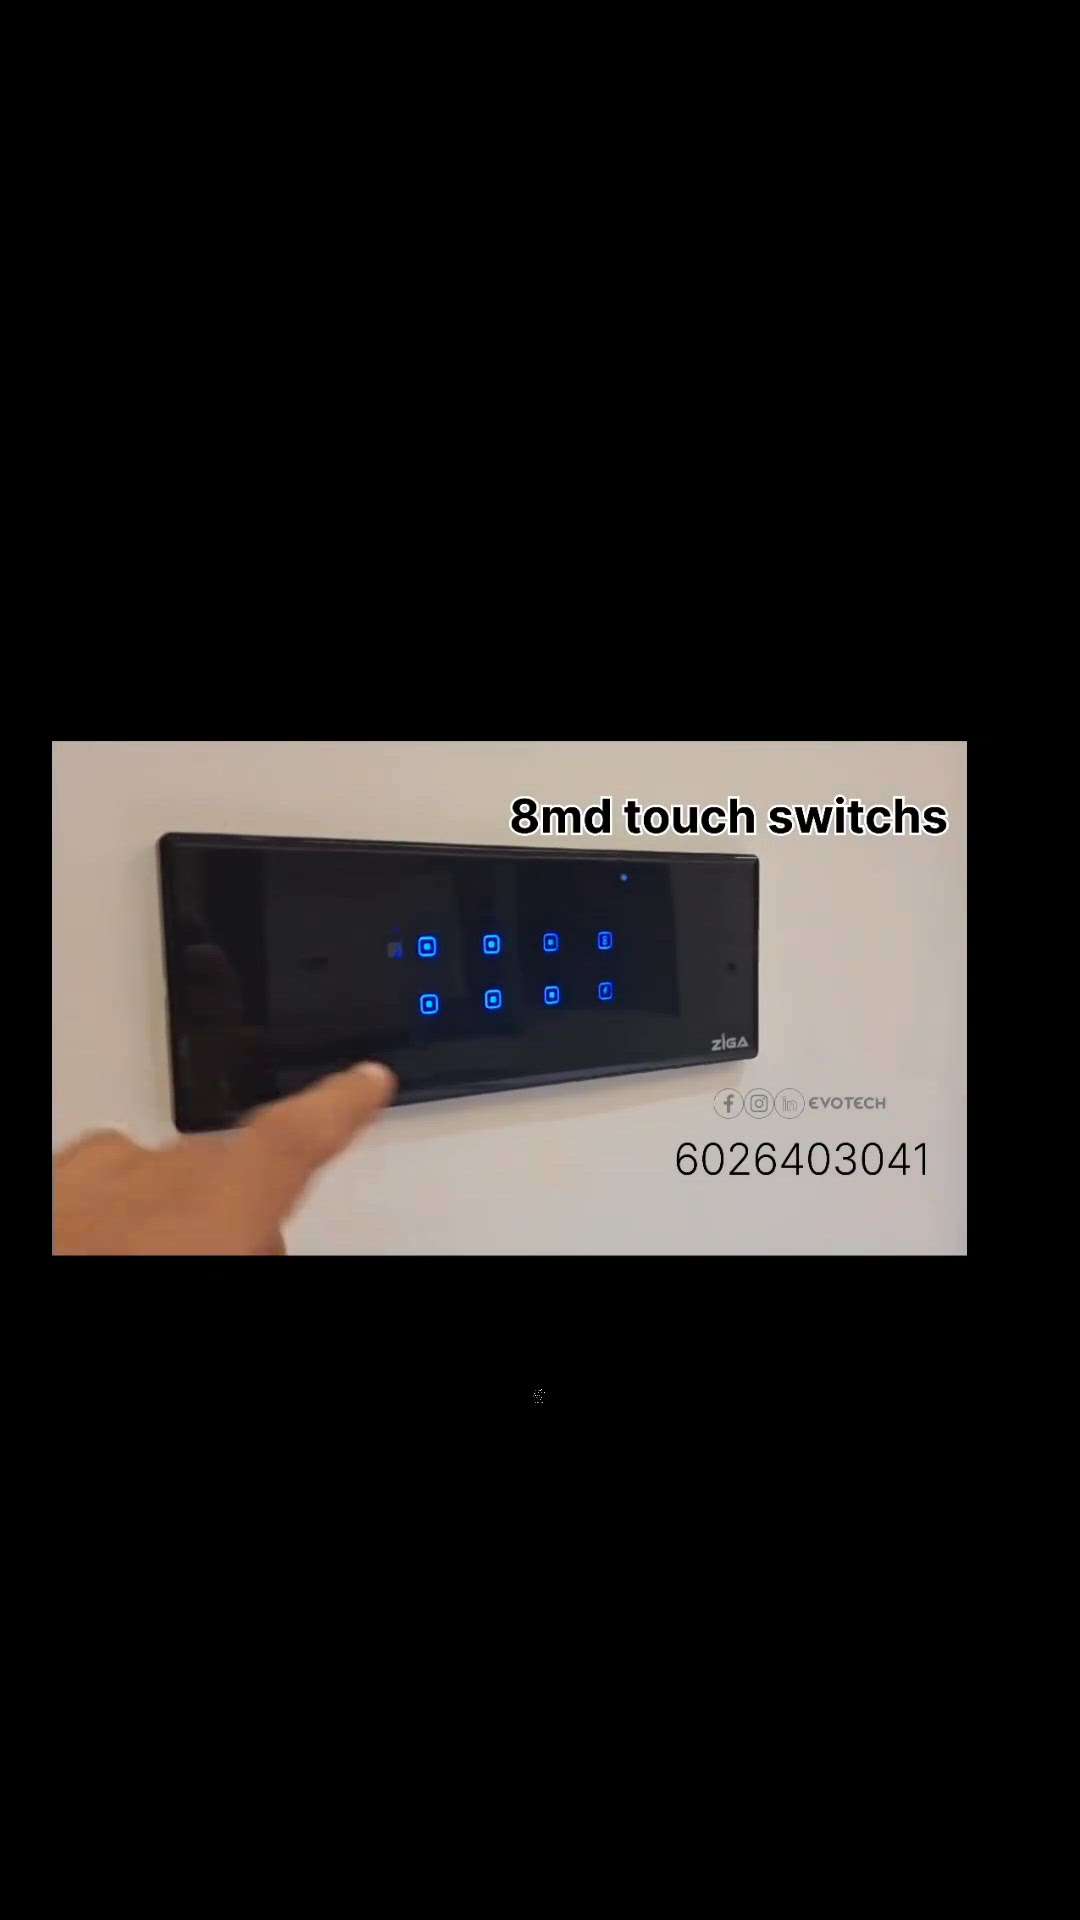 touch switchs
#smarthomes #smartswitches #smartswitch #touchswitches #HomeAutomation #automated  #automationsolution